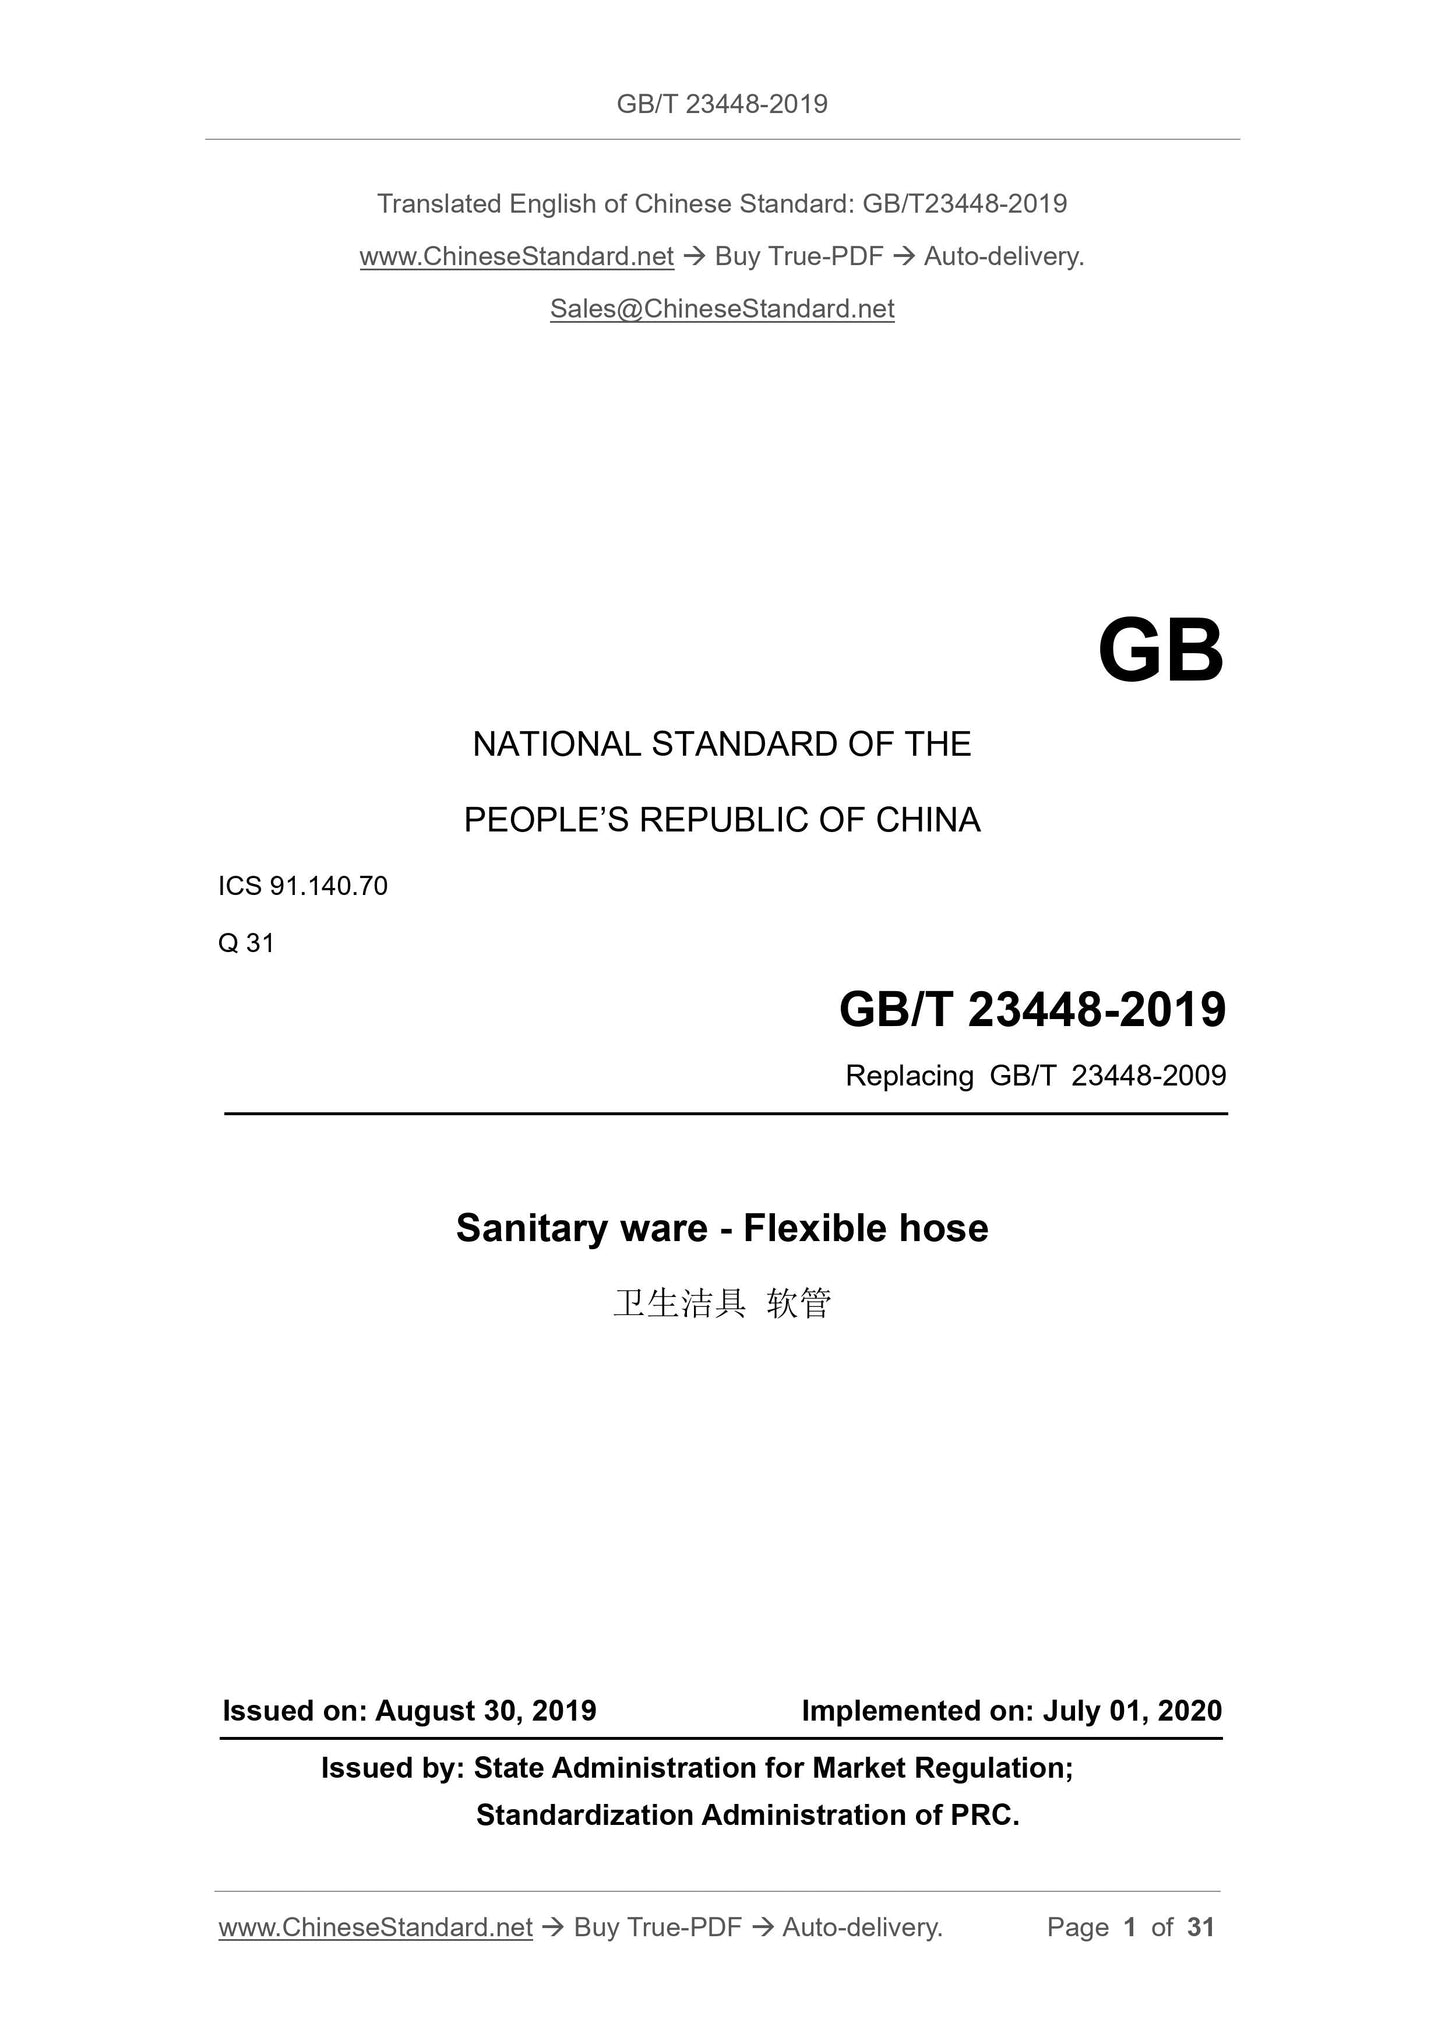 GB/T 23448-2019 Page 1